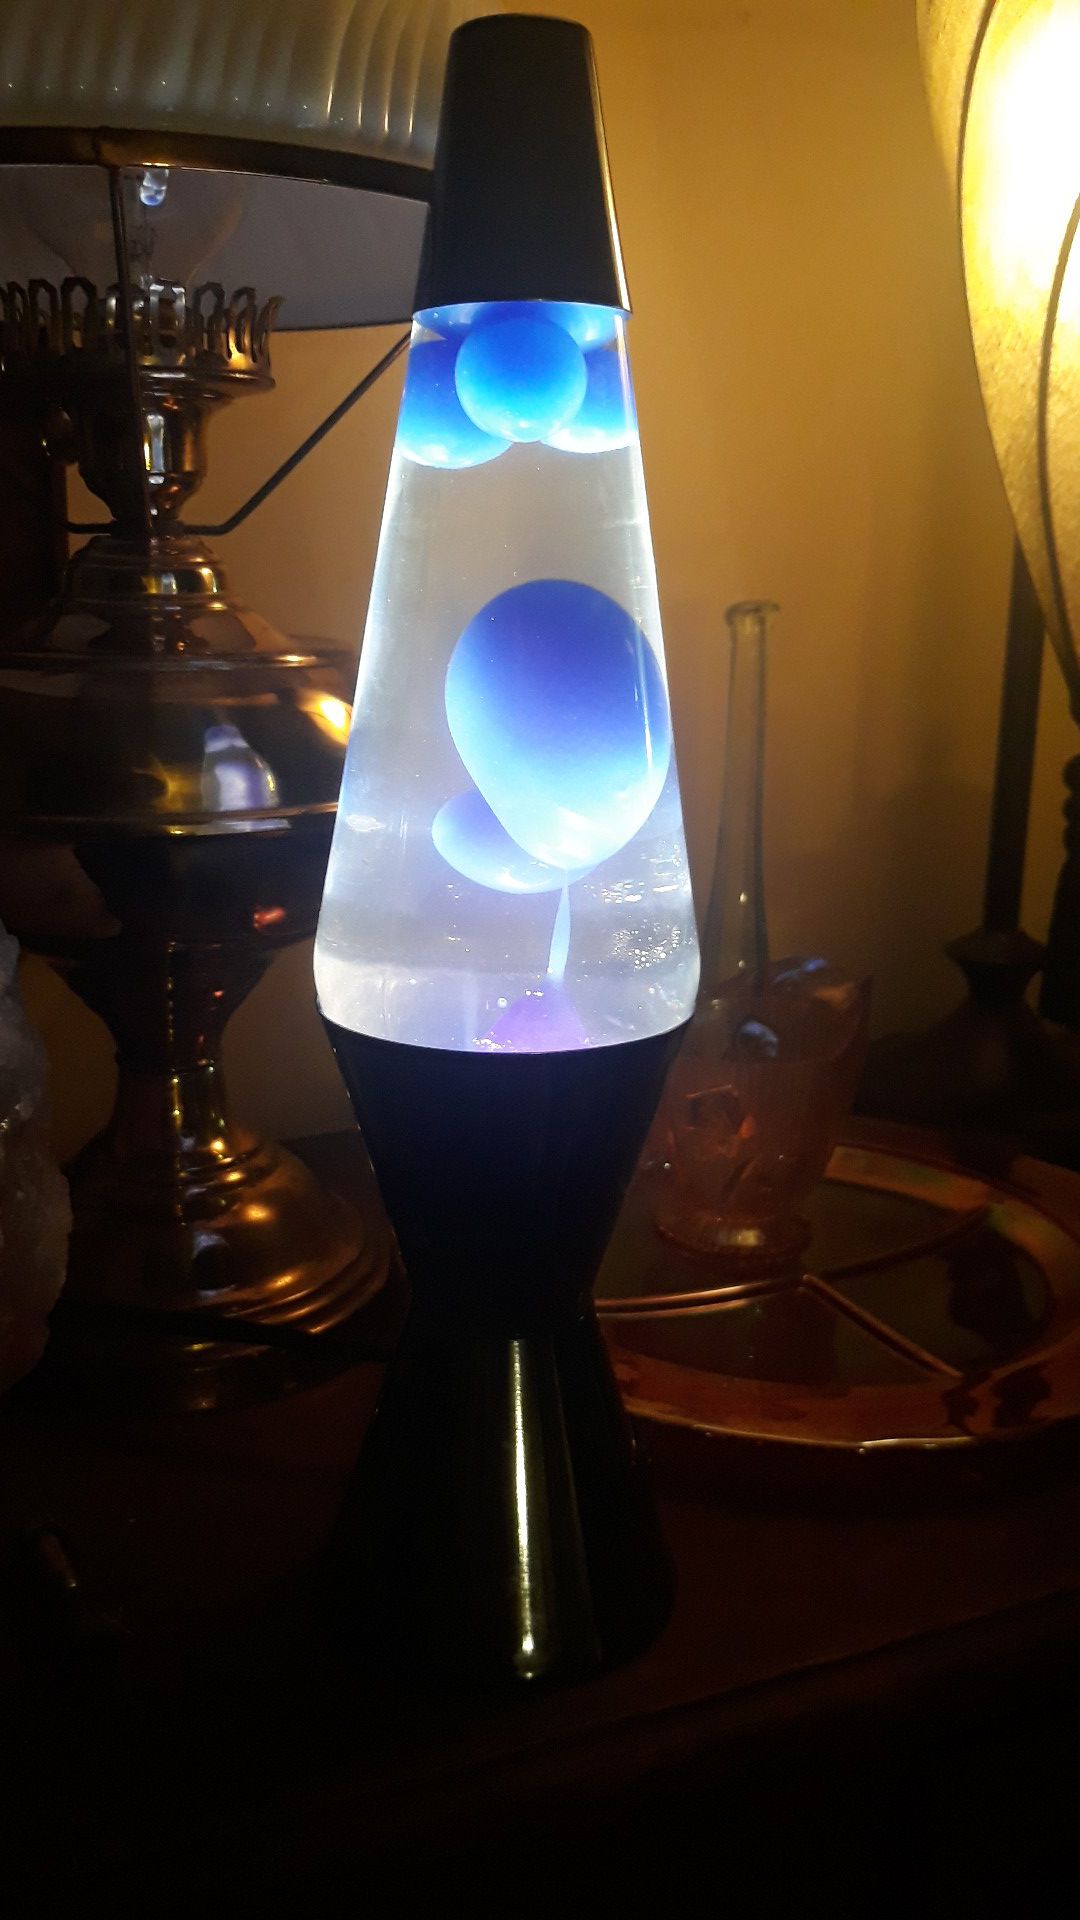 Blazing deal on Lava Lamps